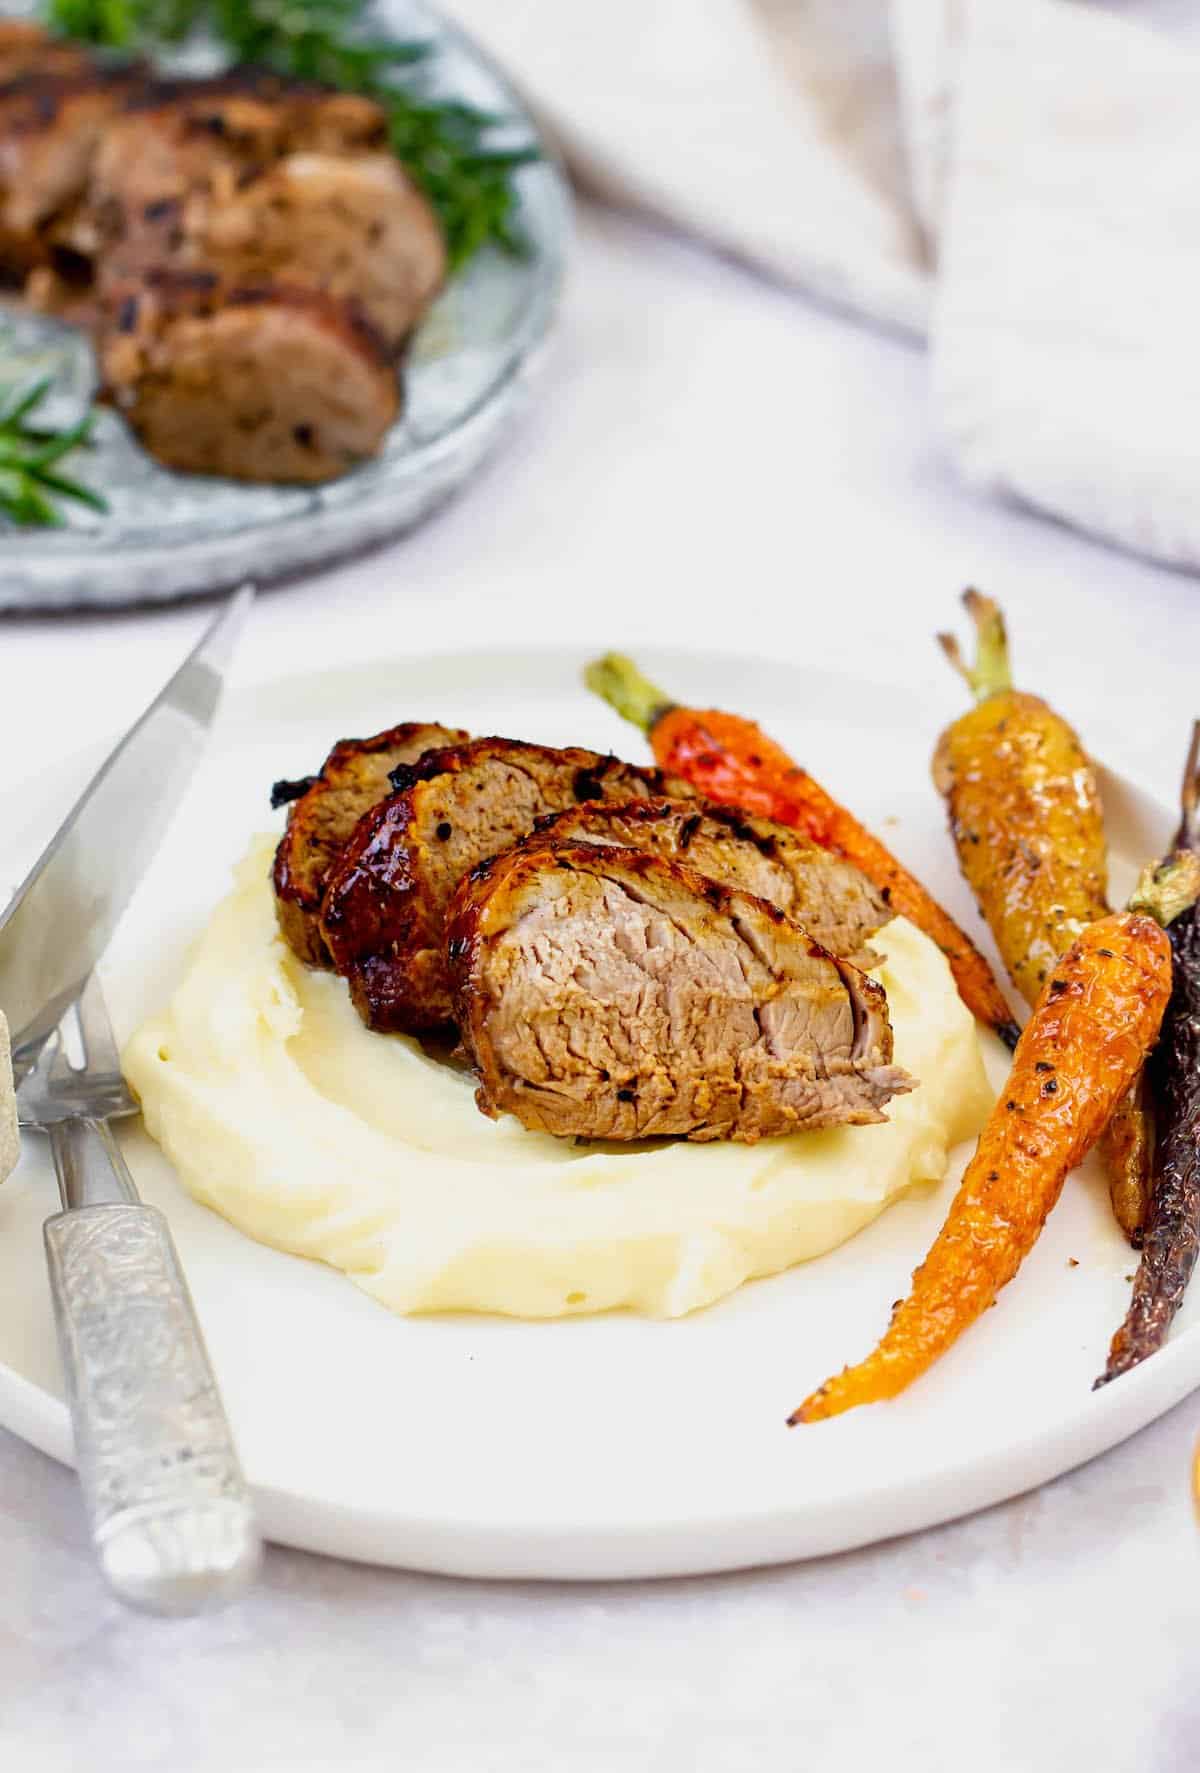 Slices of grilled pork on a bed of mashed potatoes with carrots.